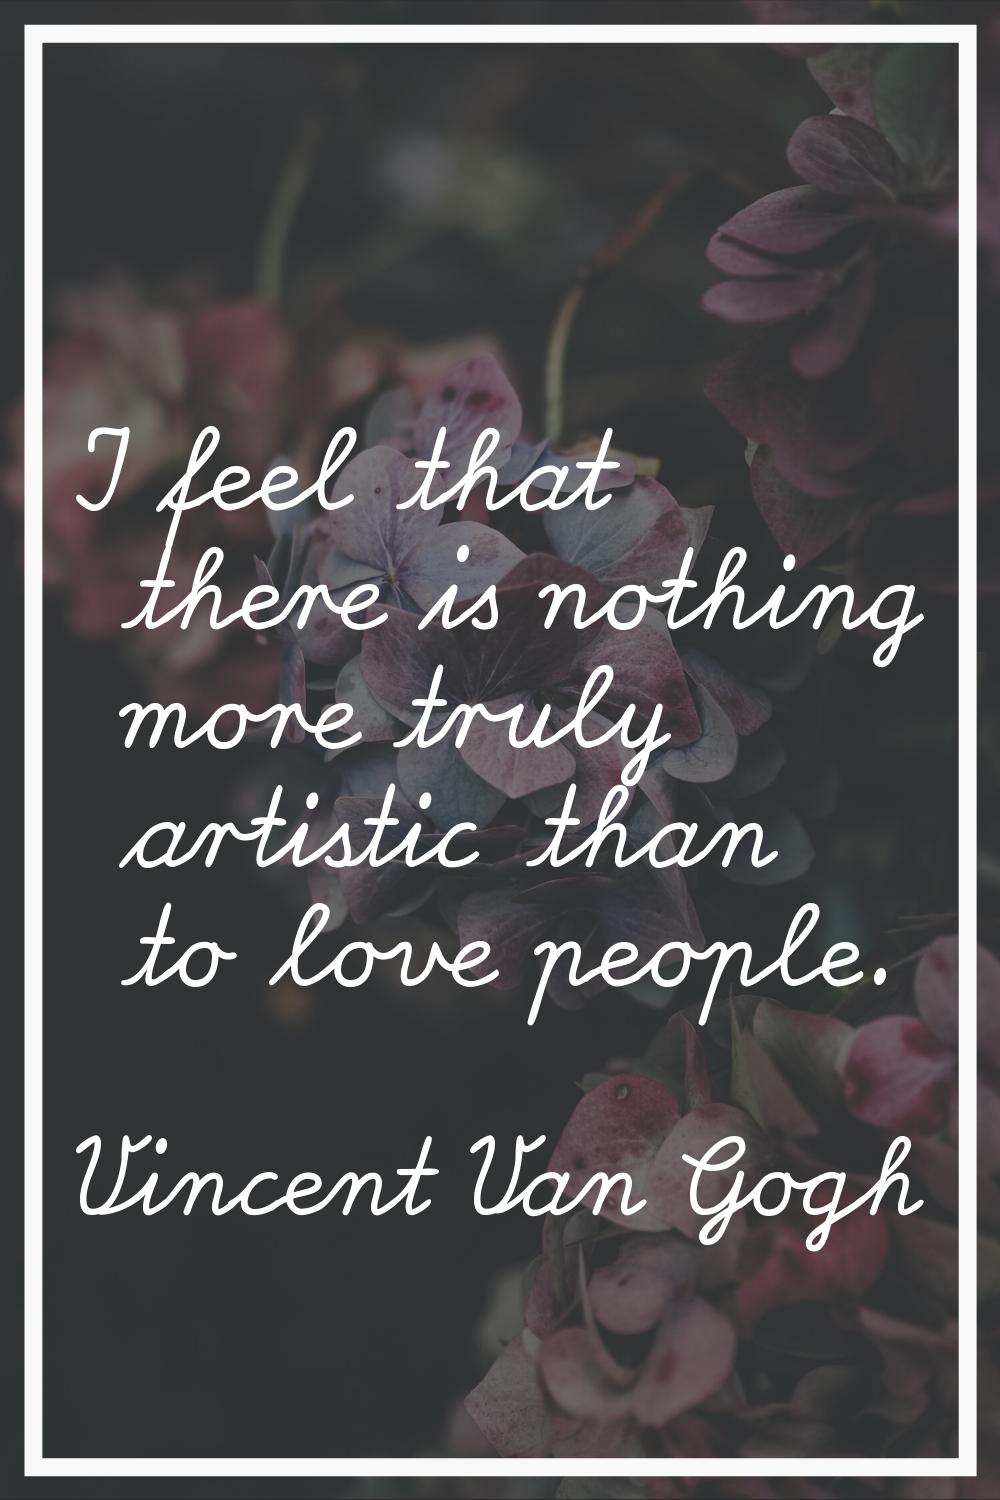 I feel that there is nothing more truly artistic than to love people.